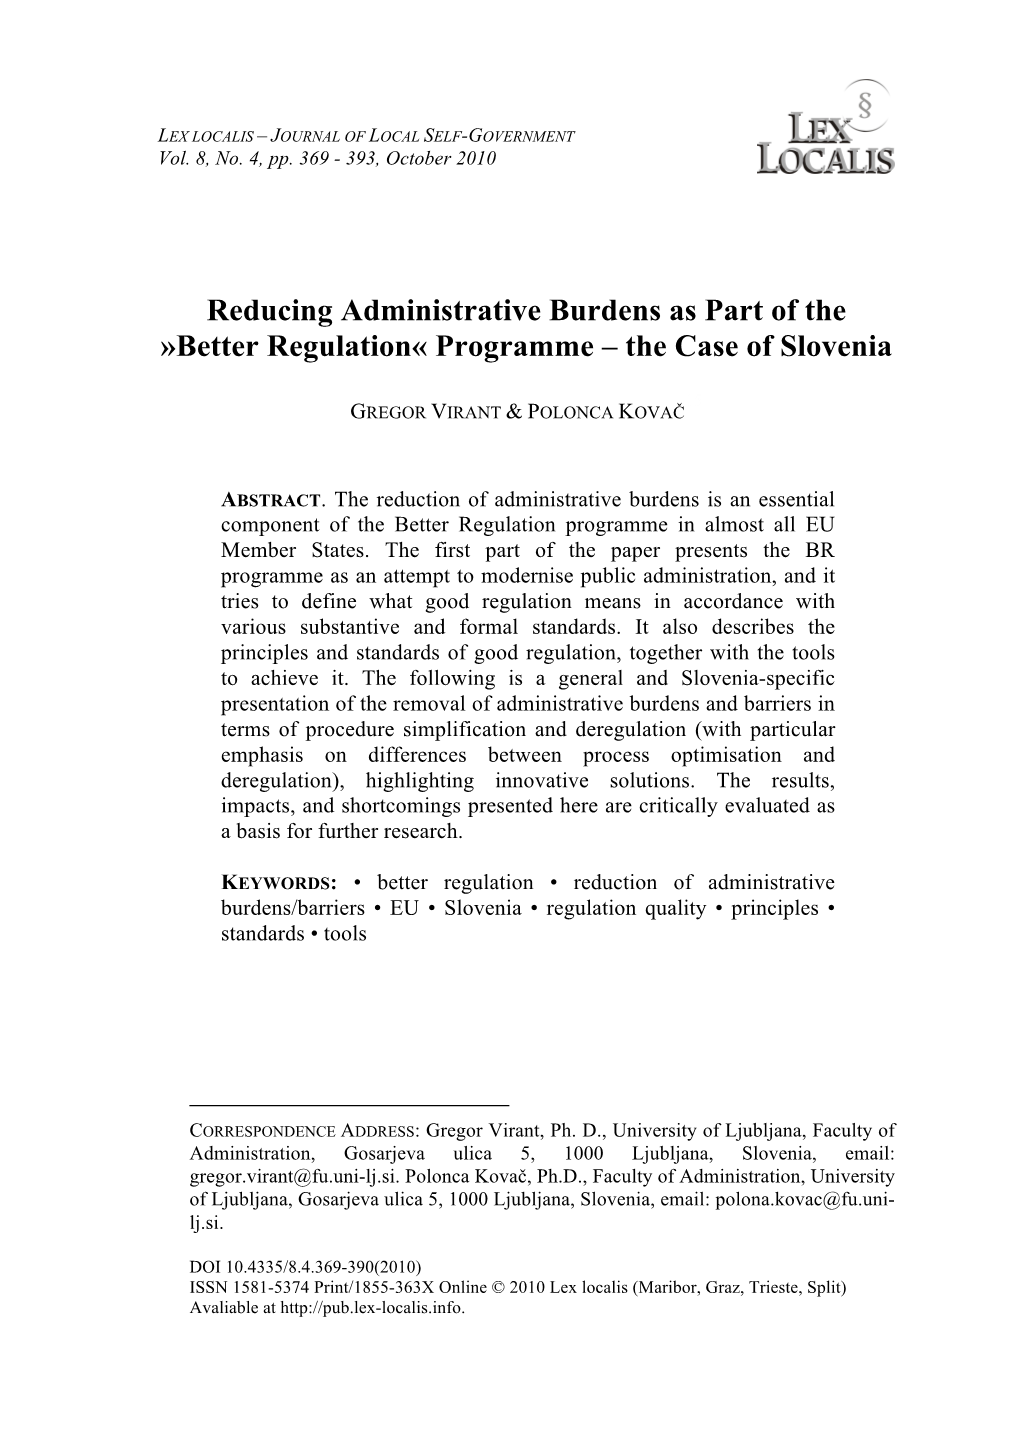 Reducing Administrative Burdens As Part of the »Better Regulation« Programme – the Case of Slovenia